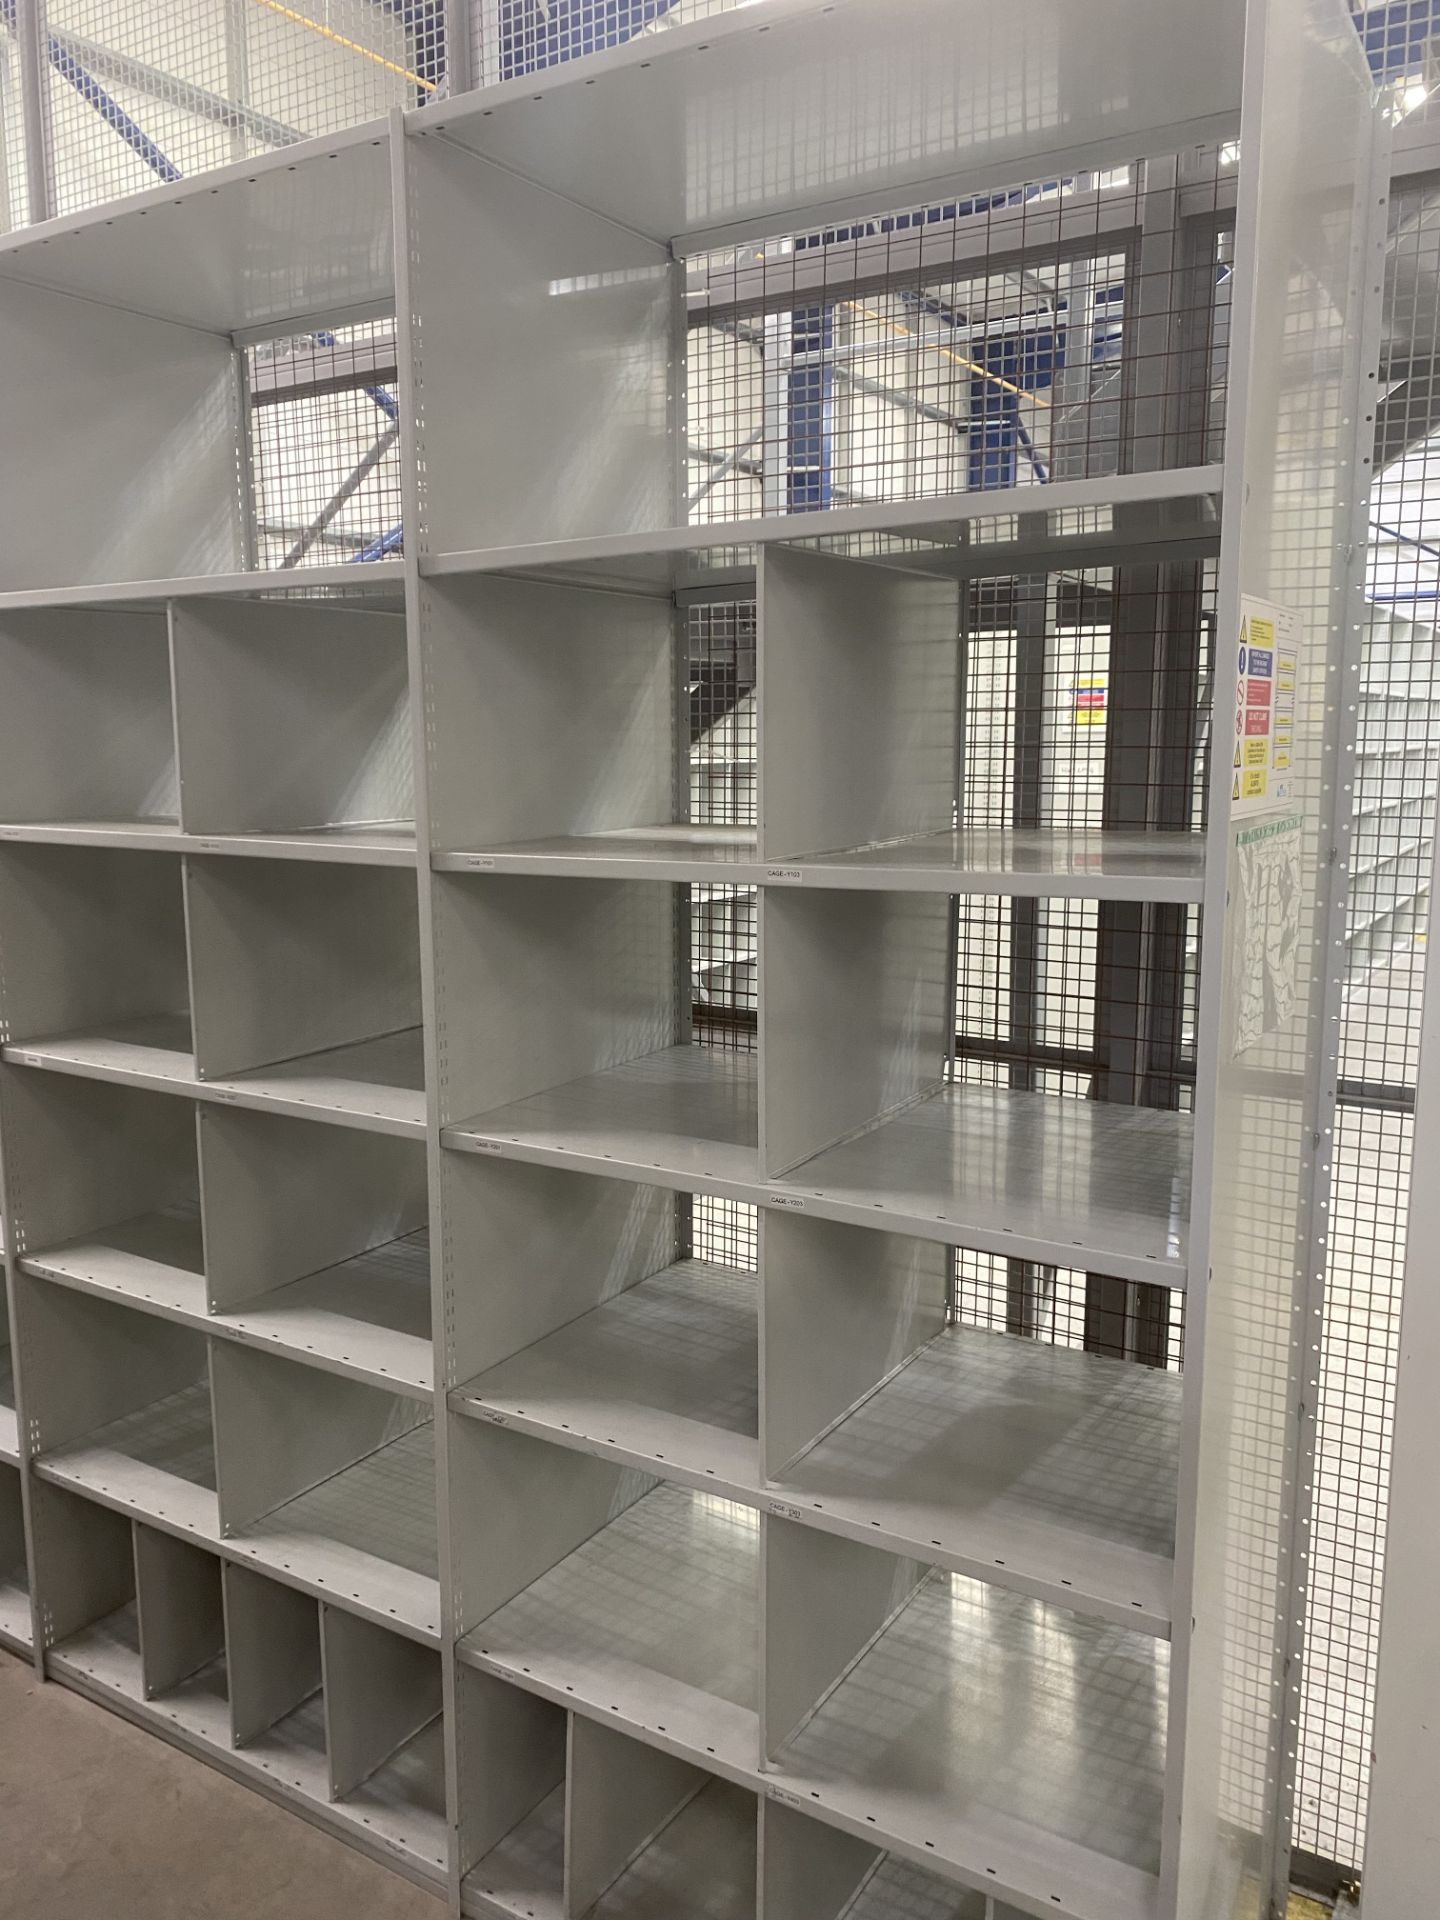 4 BAYS X ADJUSTABLE WAREHOUSE SHELVING - (CAN BE DISMANTLED) - Image 2 of 3